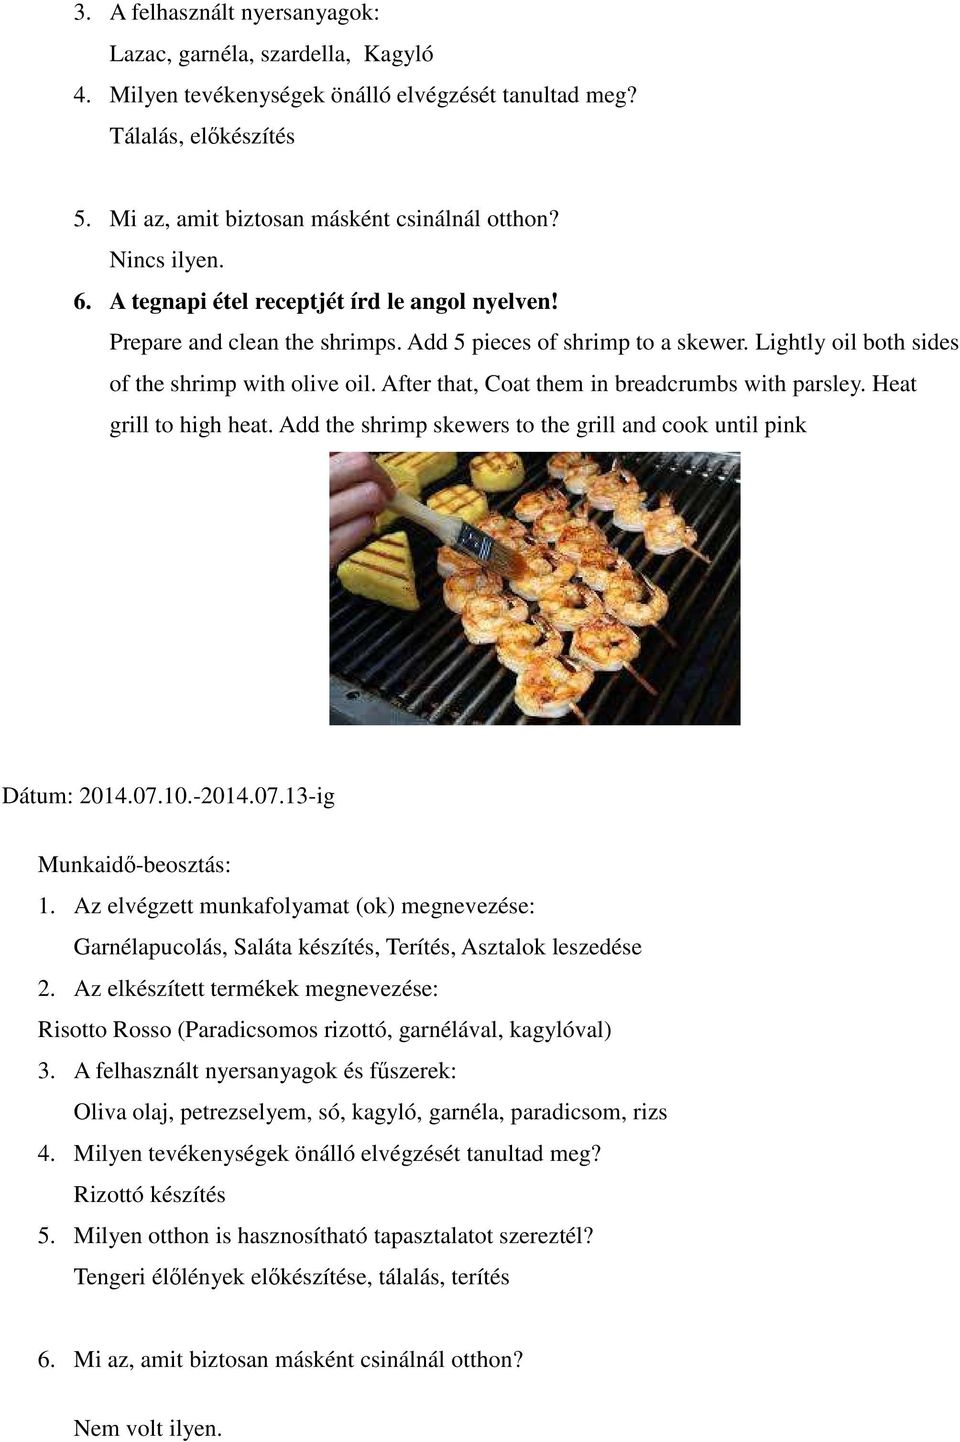 After that, Coat them in breadcrumbs with parsley. Heat grill to high heat. Add the shrimp skewers to the grill and cook until pink Dátum: 2014.07.10.-2014.07.13-ig 1.